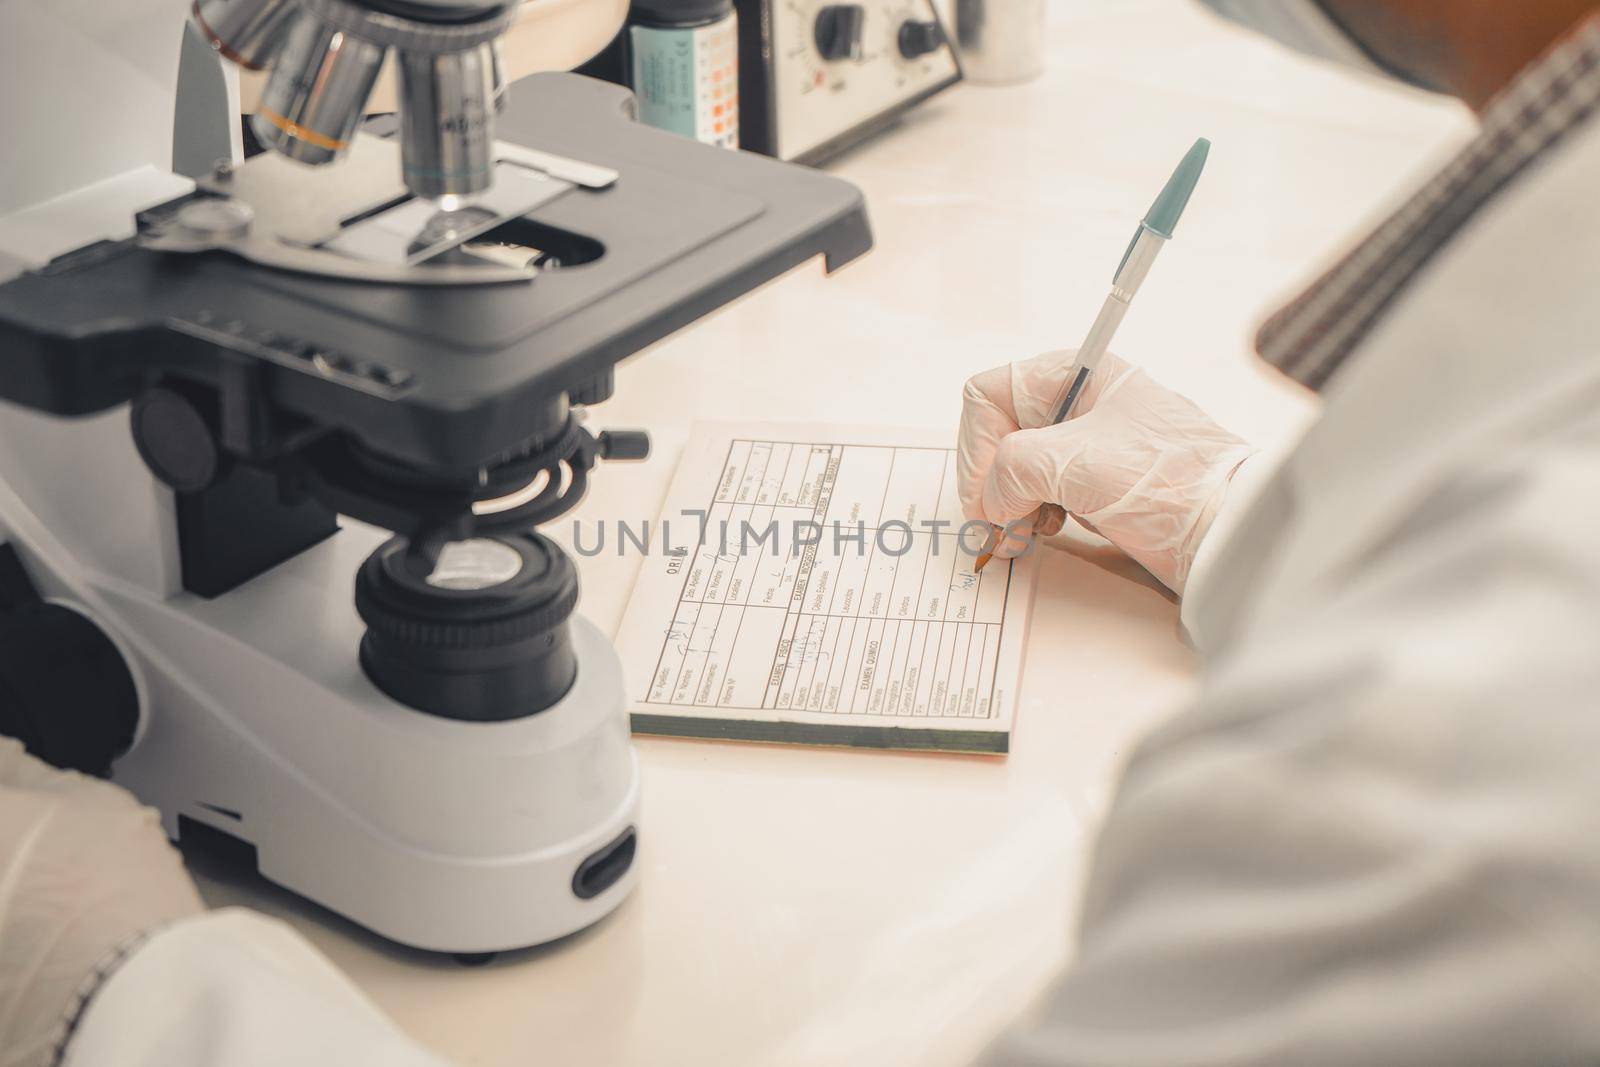 Latin Clinical analyst from Nicaragua writing down the results of a laboratory sample examined under a microscope